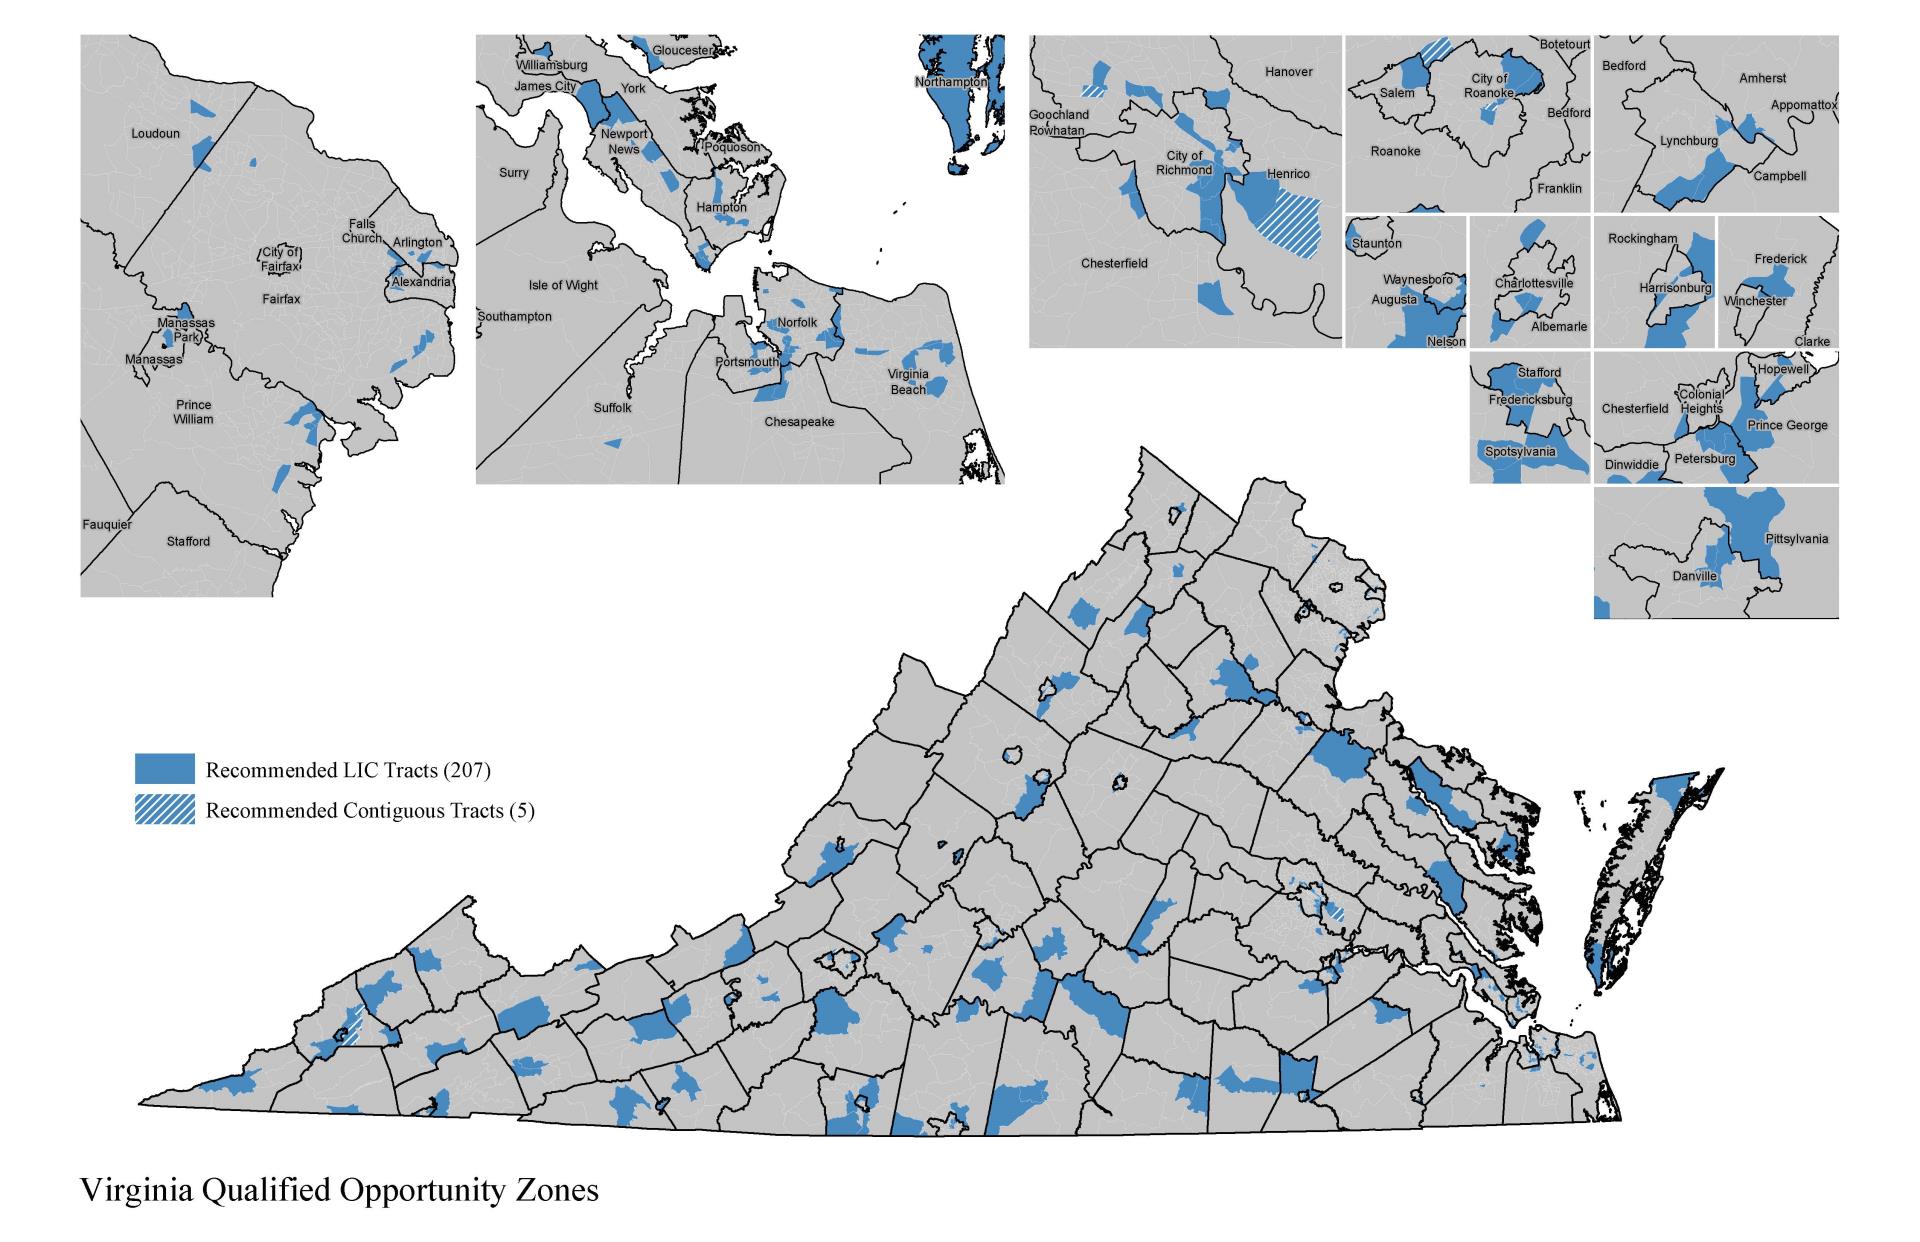 Virginia Qualified Opportunity Zones map